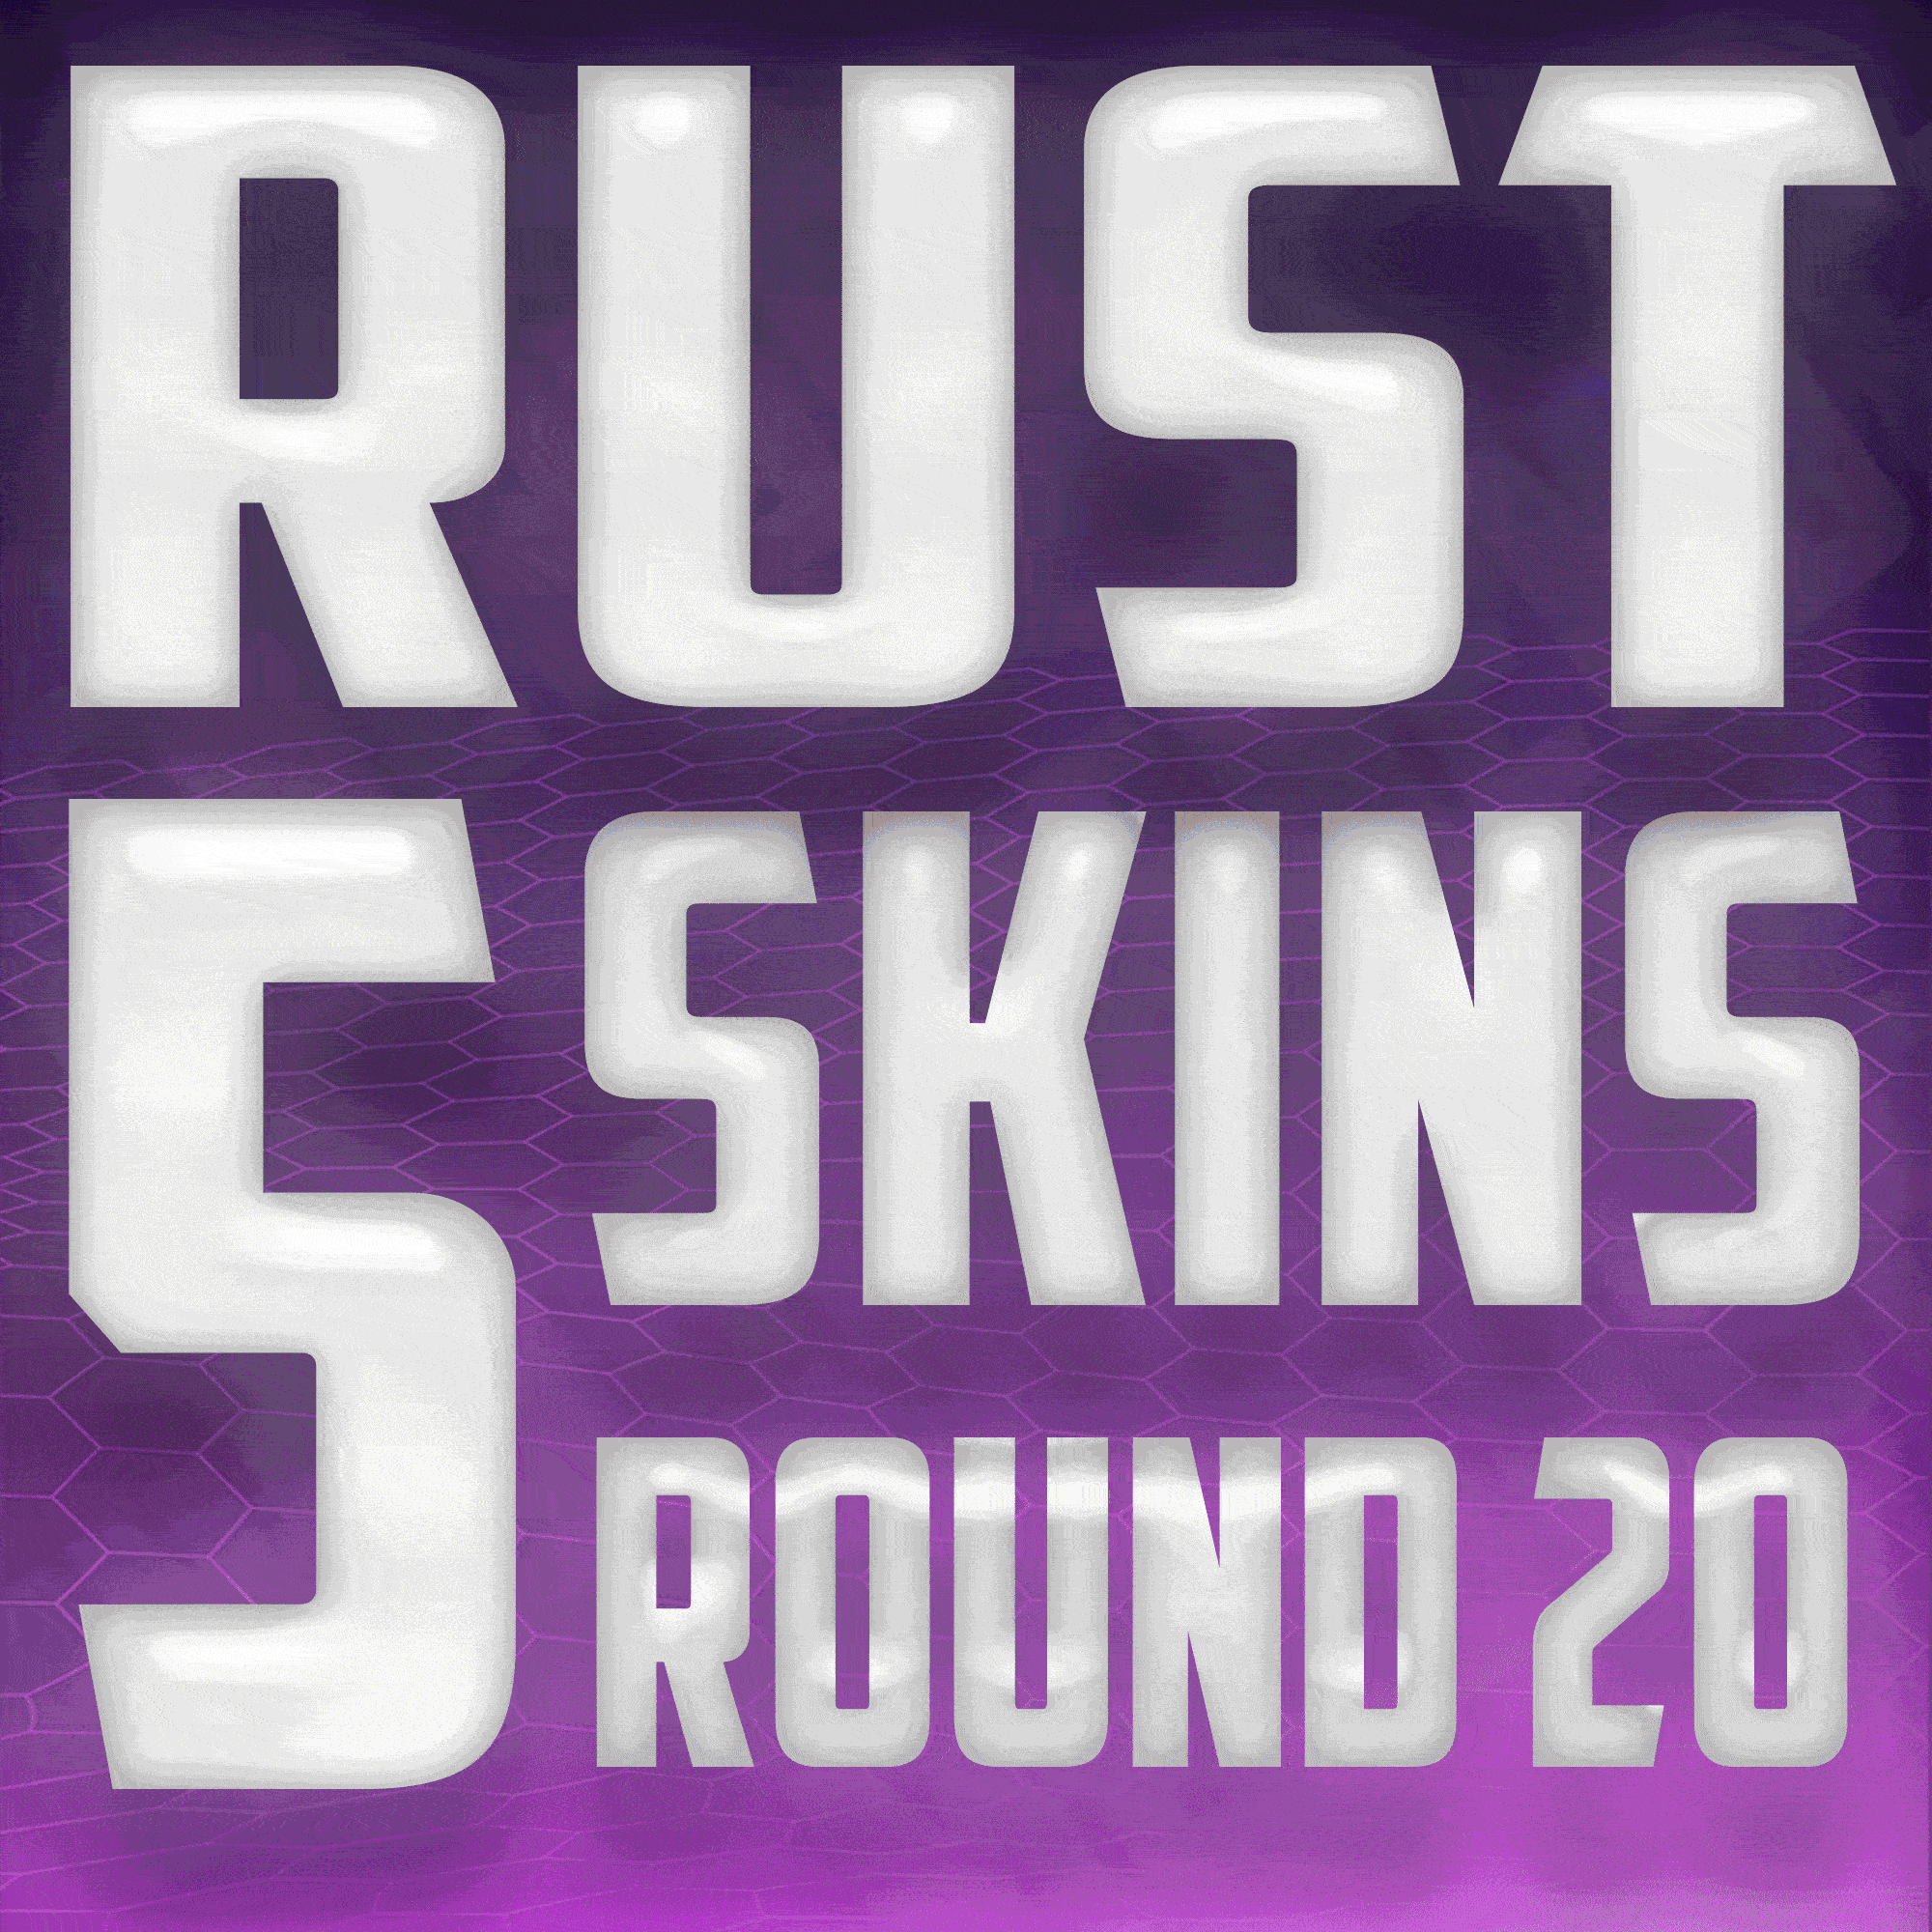 Rust account with twitch drops фото 41